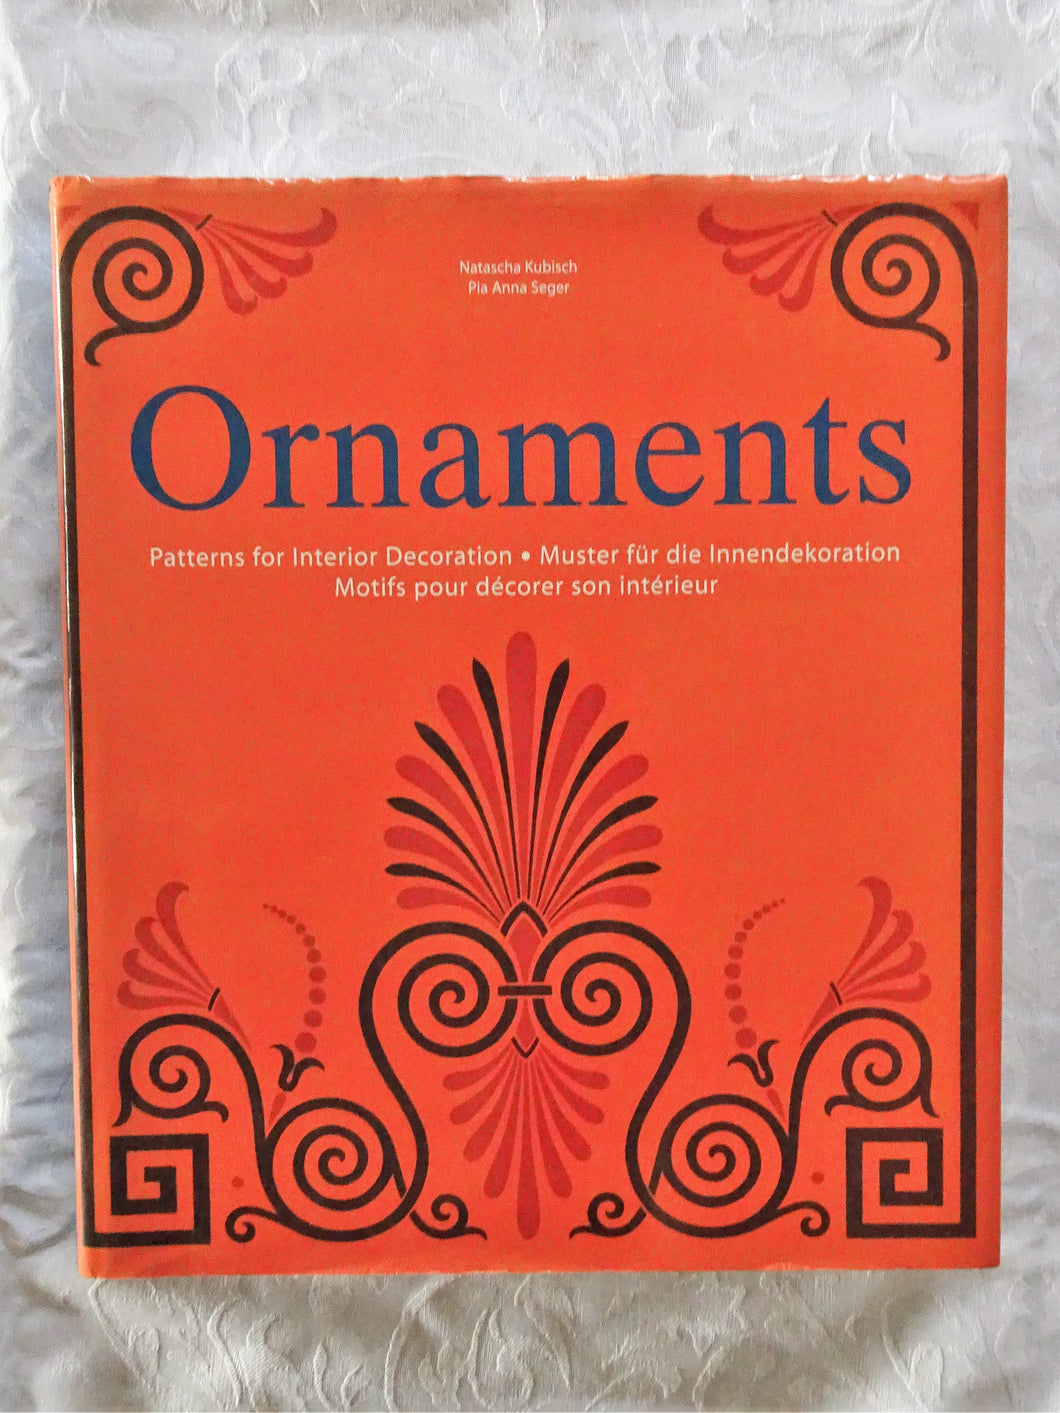 Ornaments Patterns for Interior Design by Natascha Kubisch and Pia Anna Seger